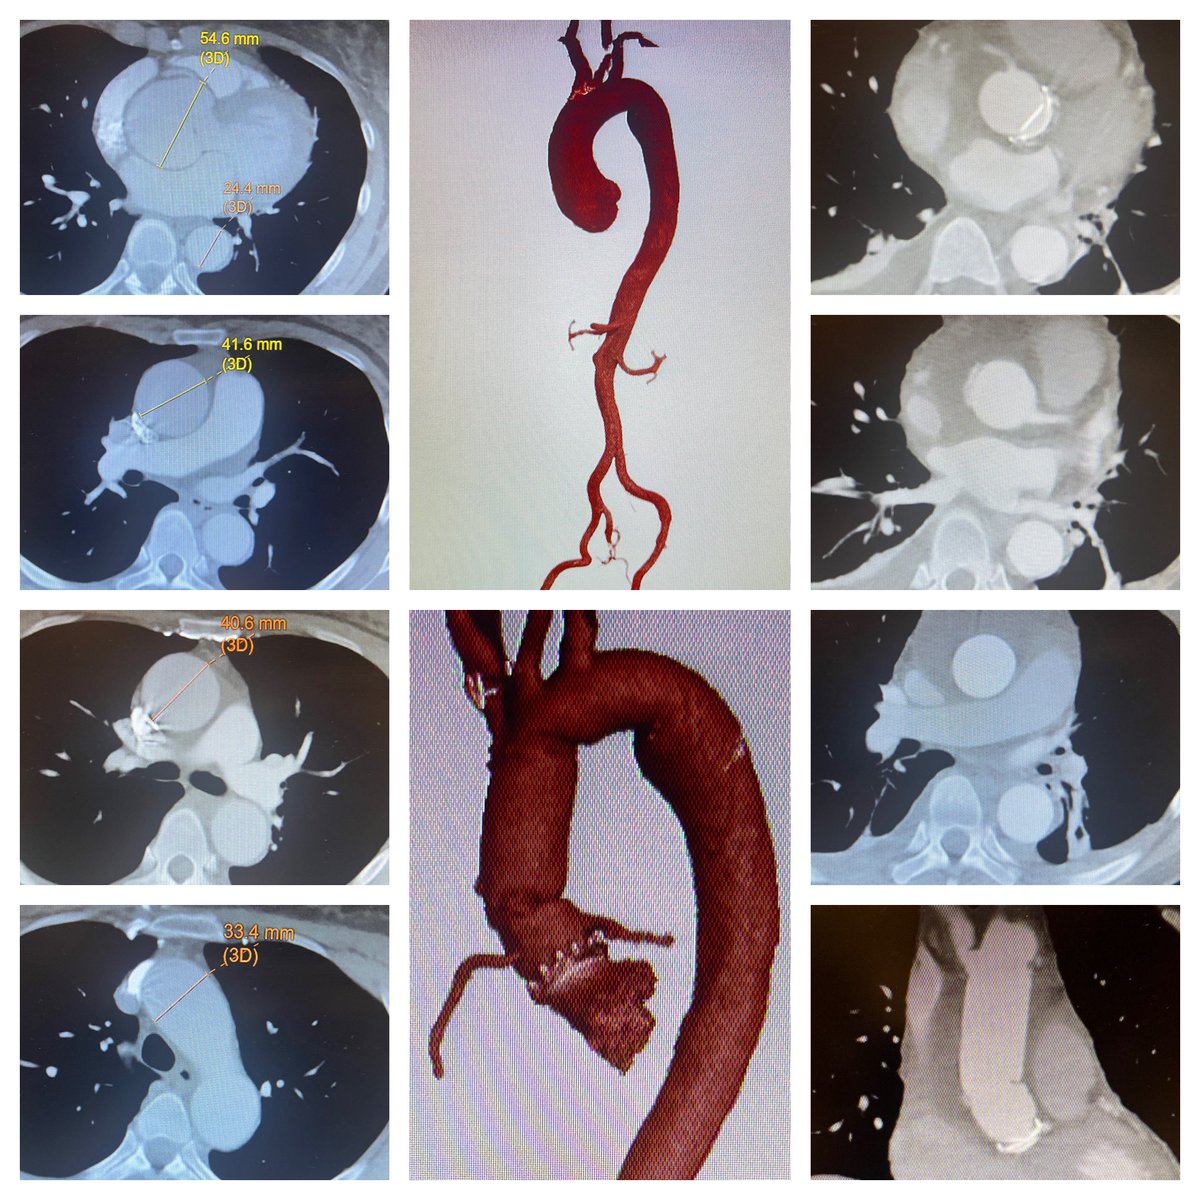 Quinquagenarian (BSA 1.6) with severe aortic insufficiency (tricuspid aortic valve) and LV dilation, associated with root + ascending + proximal transverse arch #aorticaneurysm, treated with aortic root replacement with a 23 mm mechanical composite valve graft with reimplantation…